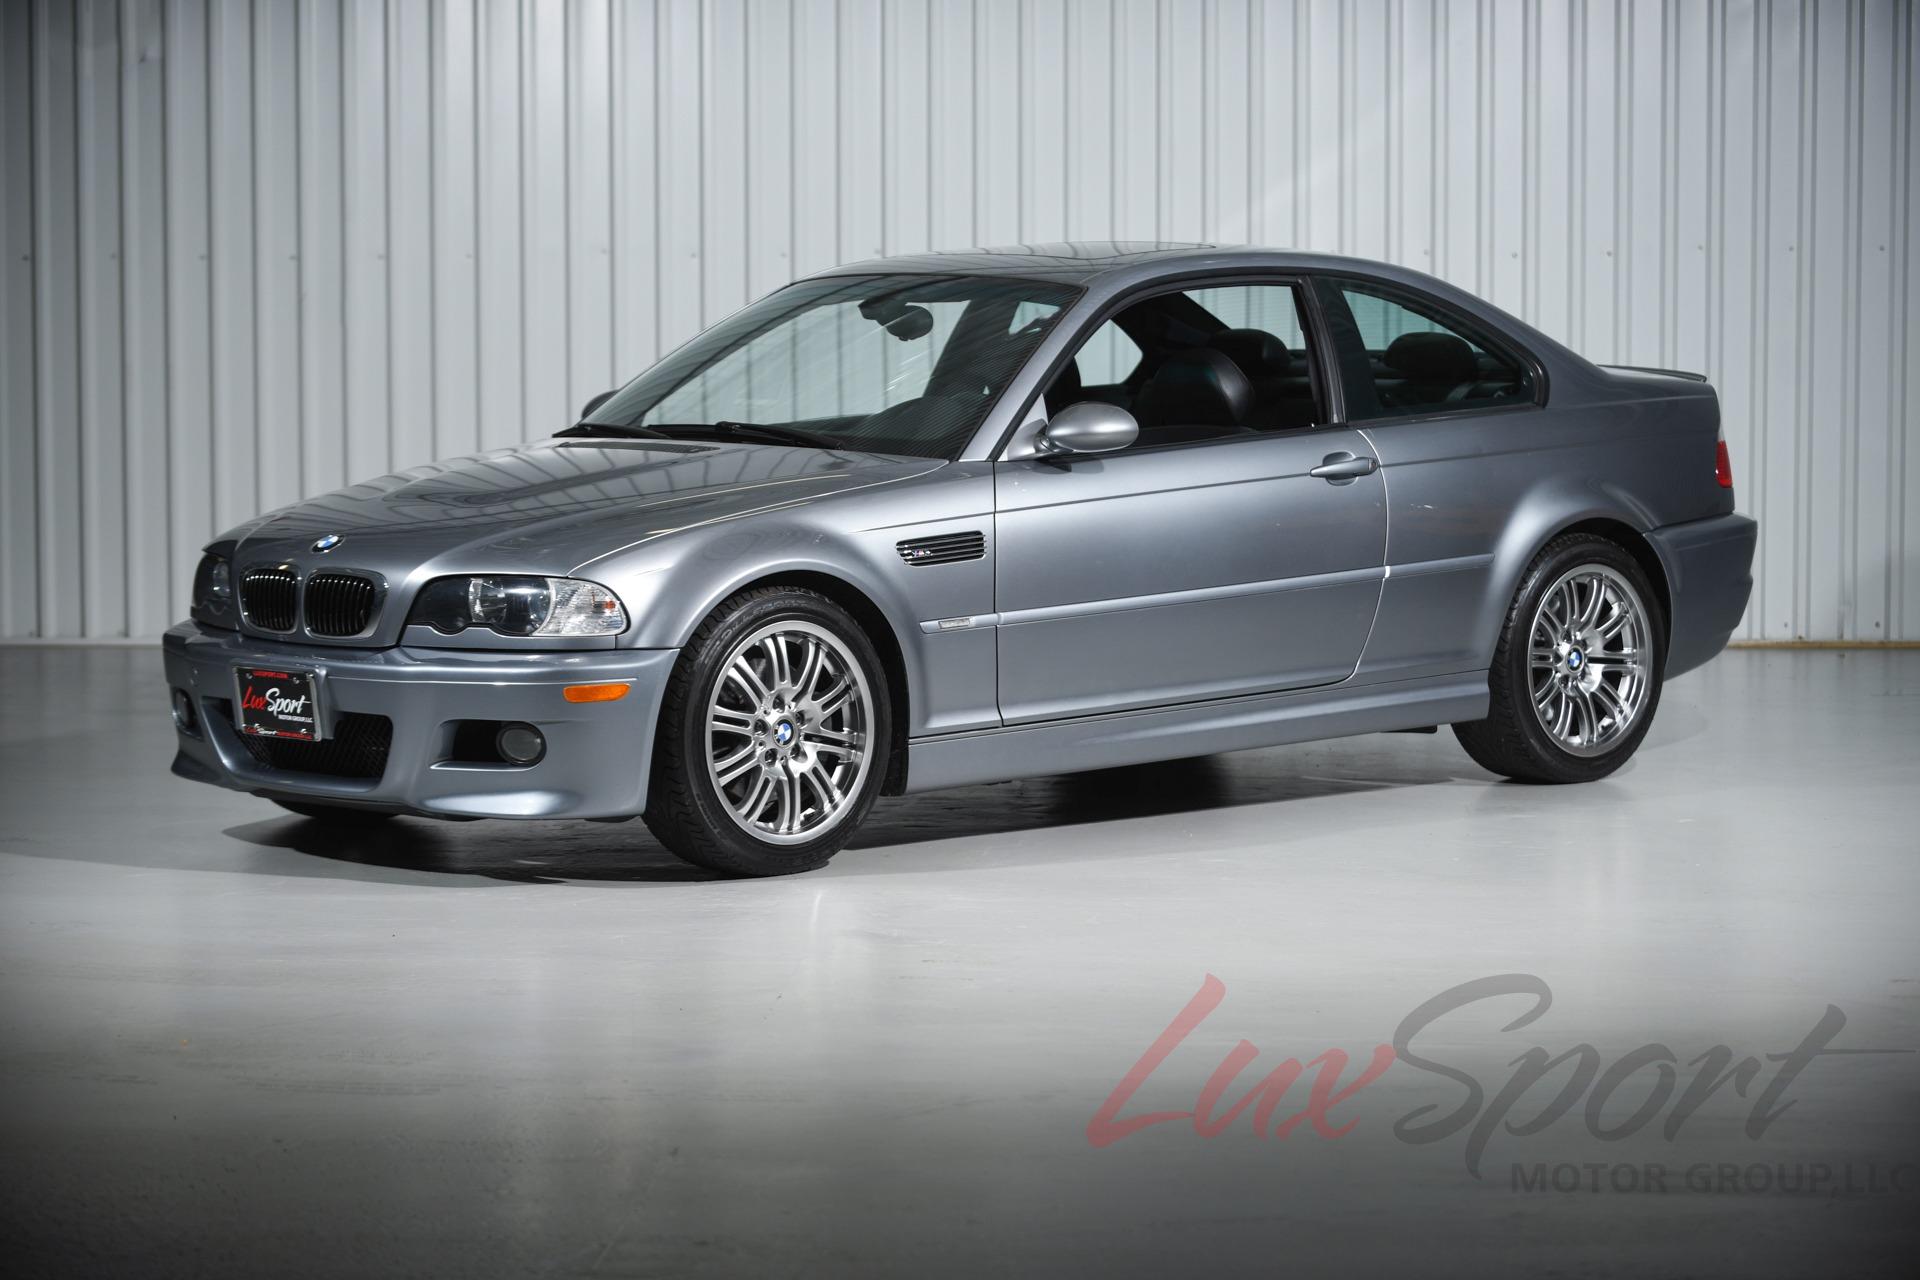 2004 BMW E46 M3 Coupe Stock # 2004125 for sale near Plainview, NY | NY BMW  Dealer